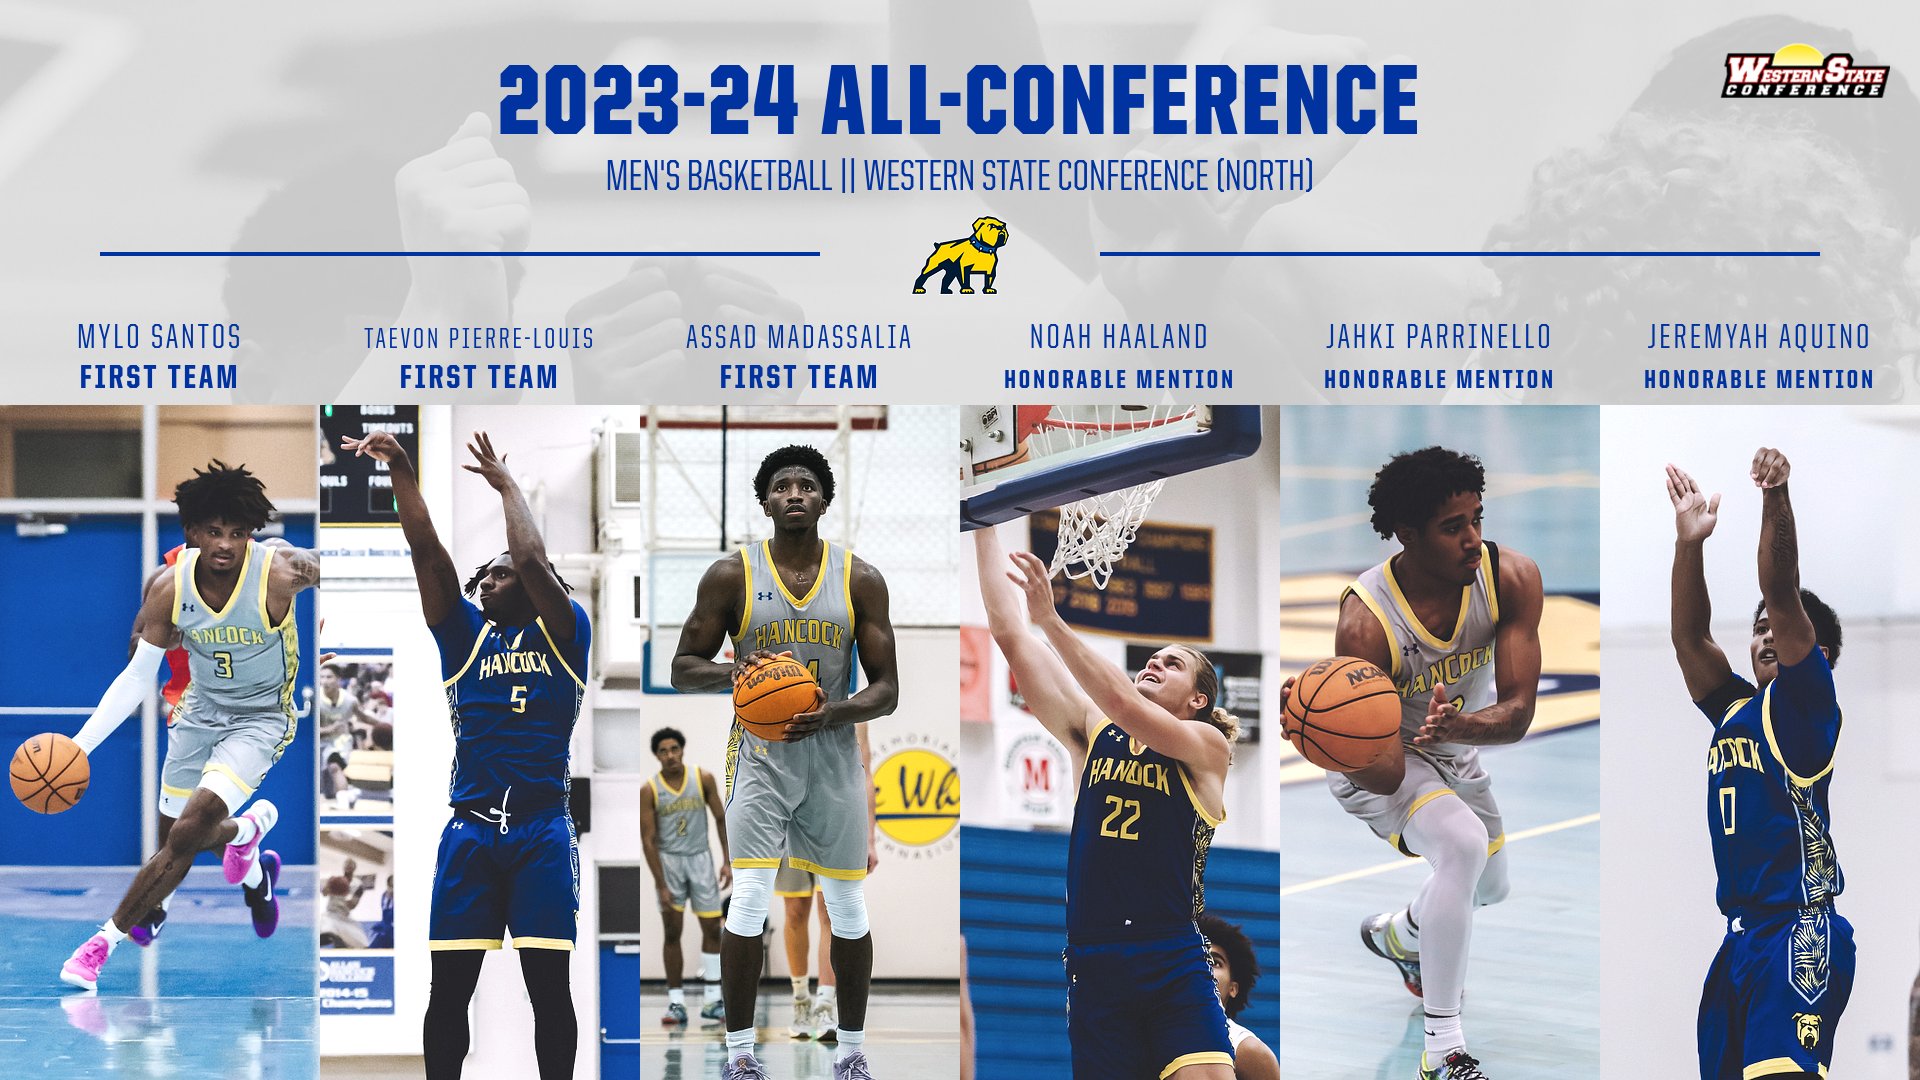 Six Land on WSC (North) All-Conference List for Men's Basketball